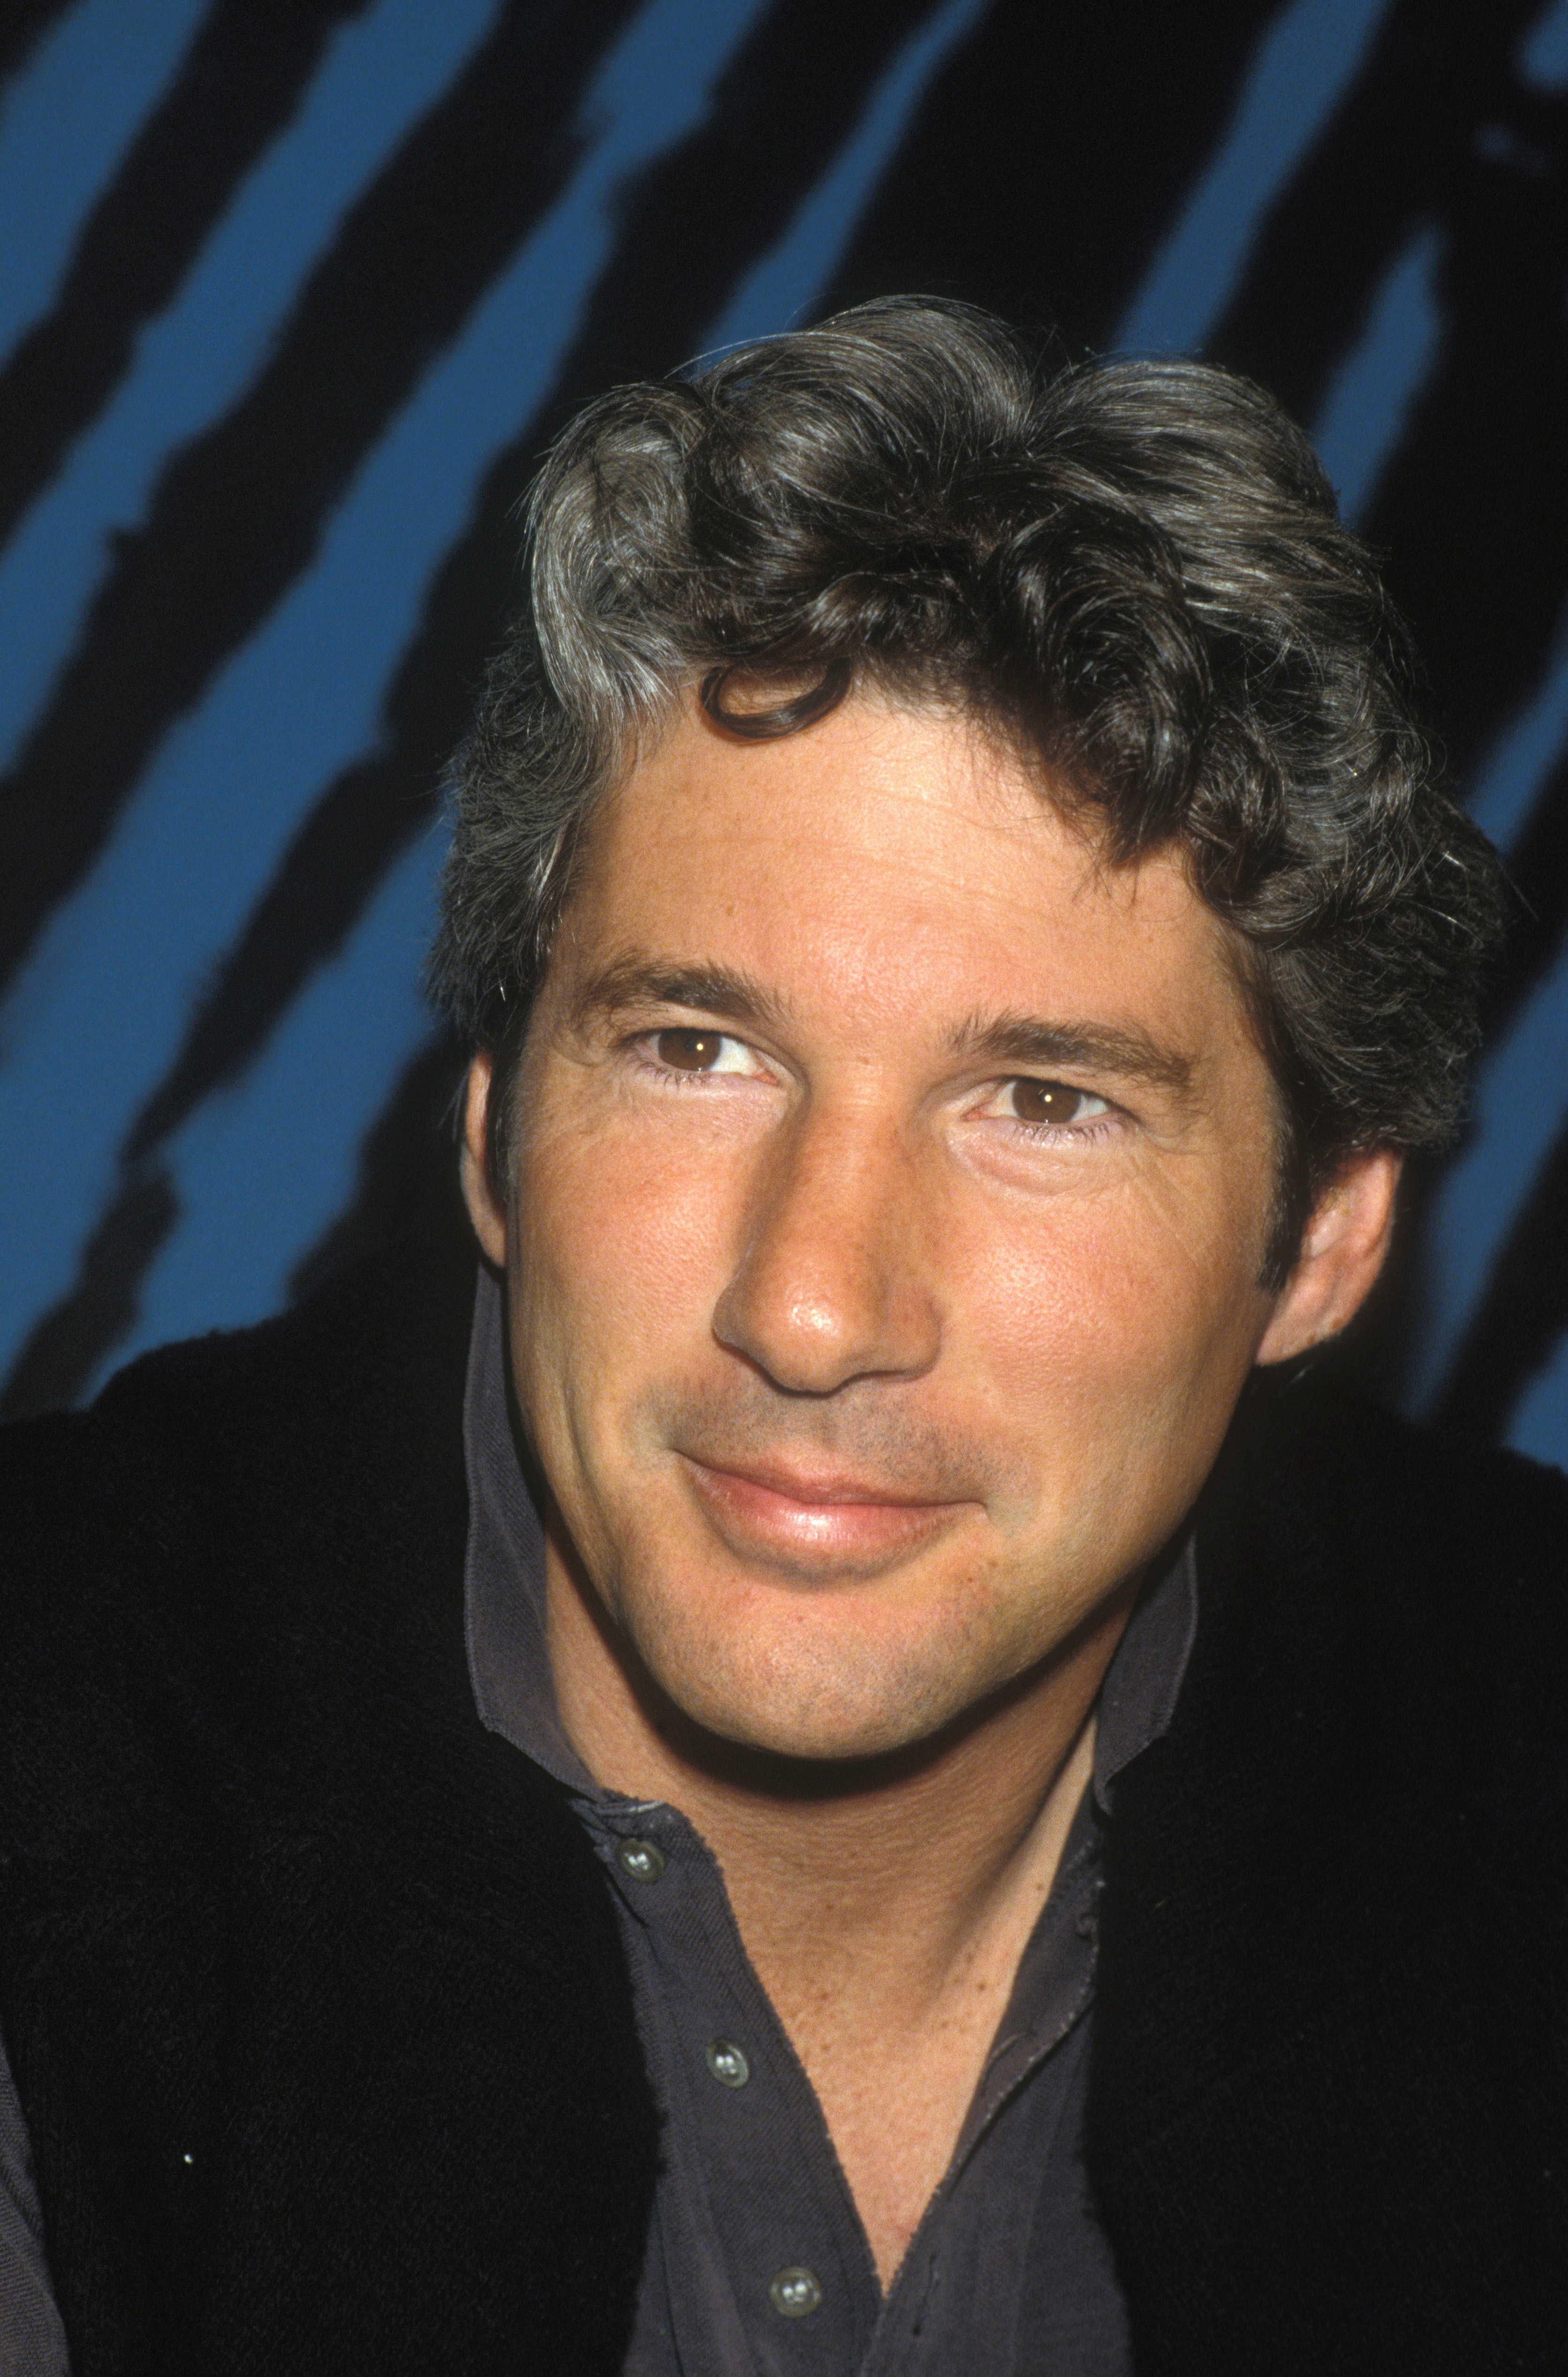 Richard Gere at the Cannes Festival in Cannes, France, on March 18, 1988. | Source: Getty Images